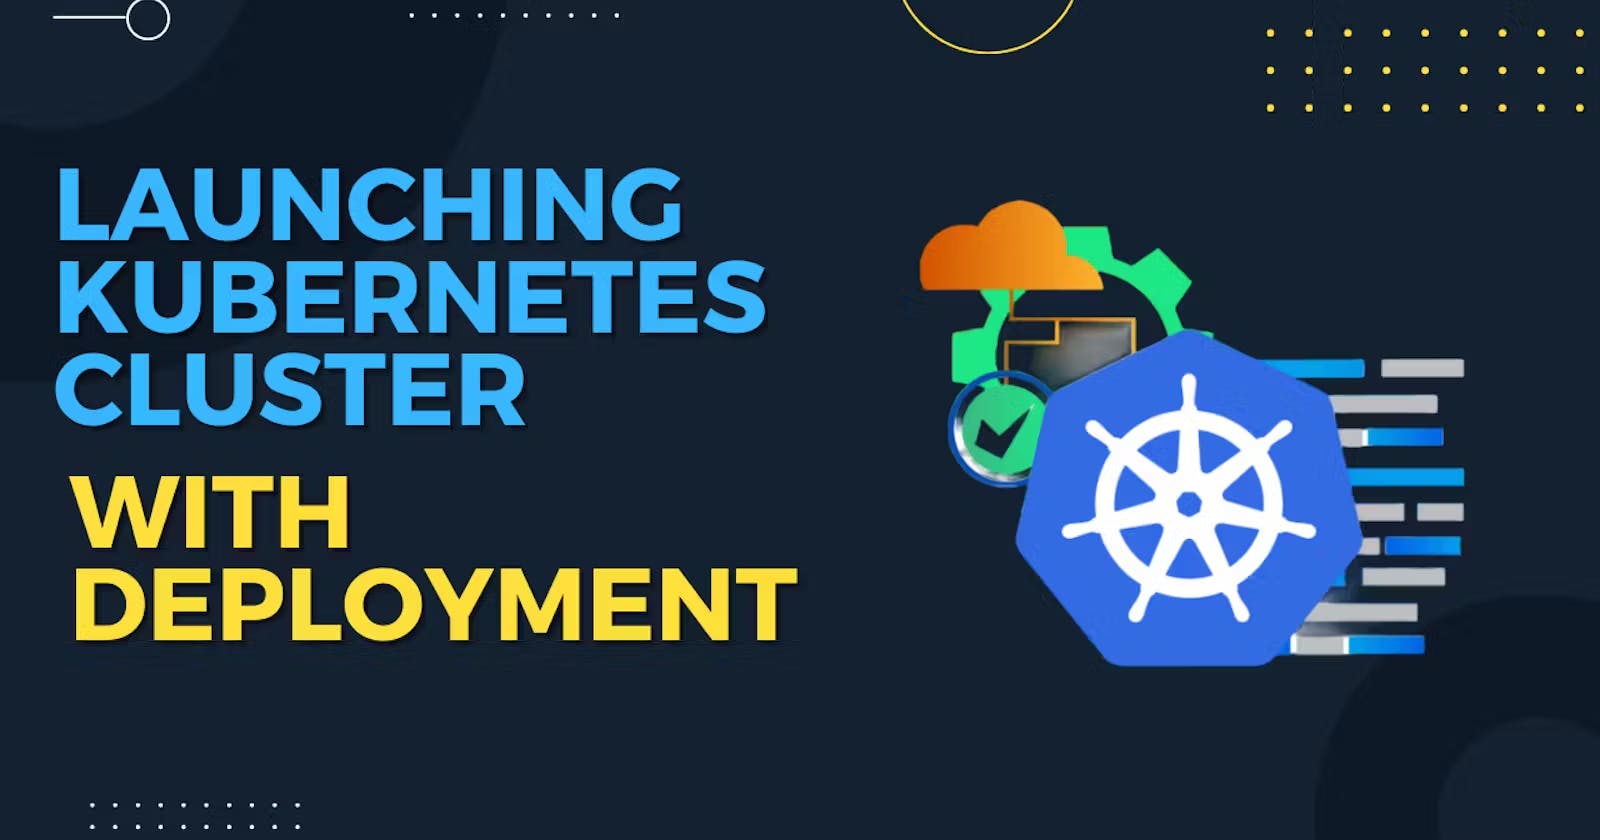 Launching Kubernetes Cluster with Deployment (Part-3)